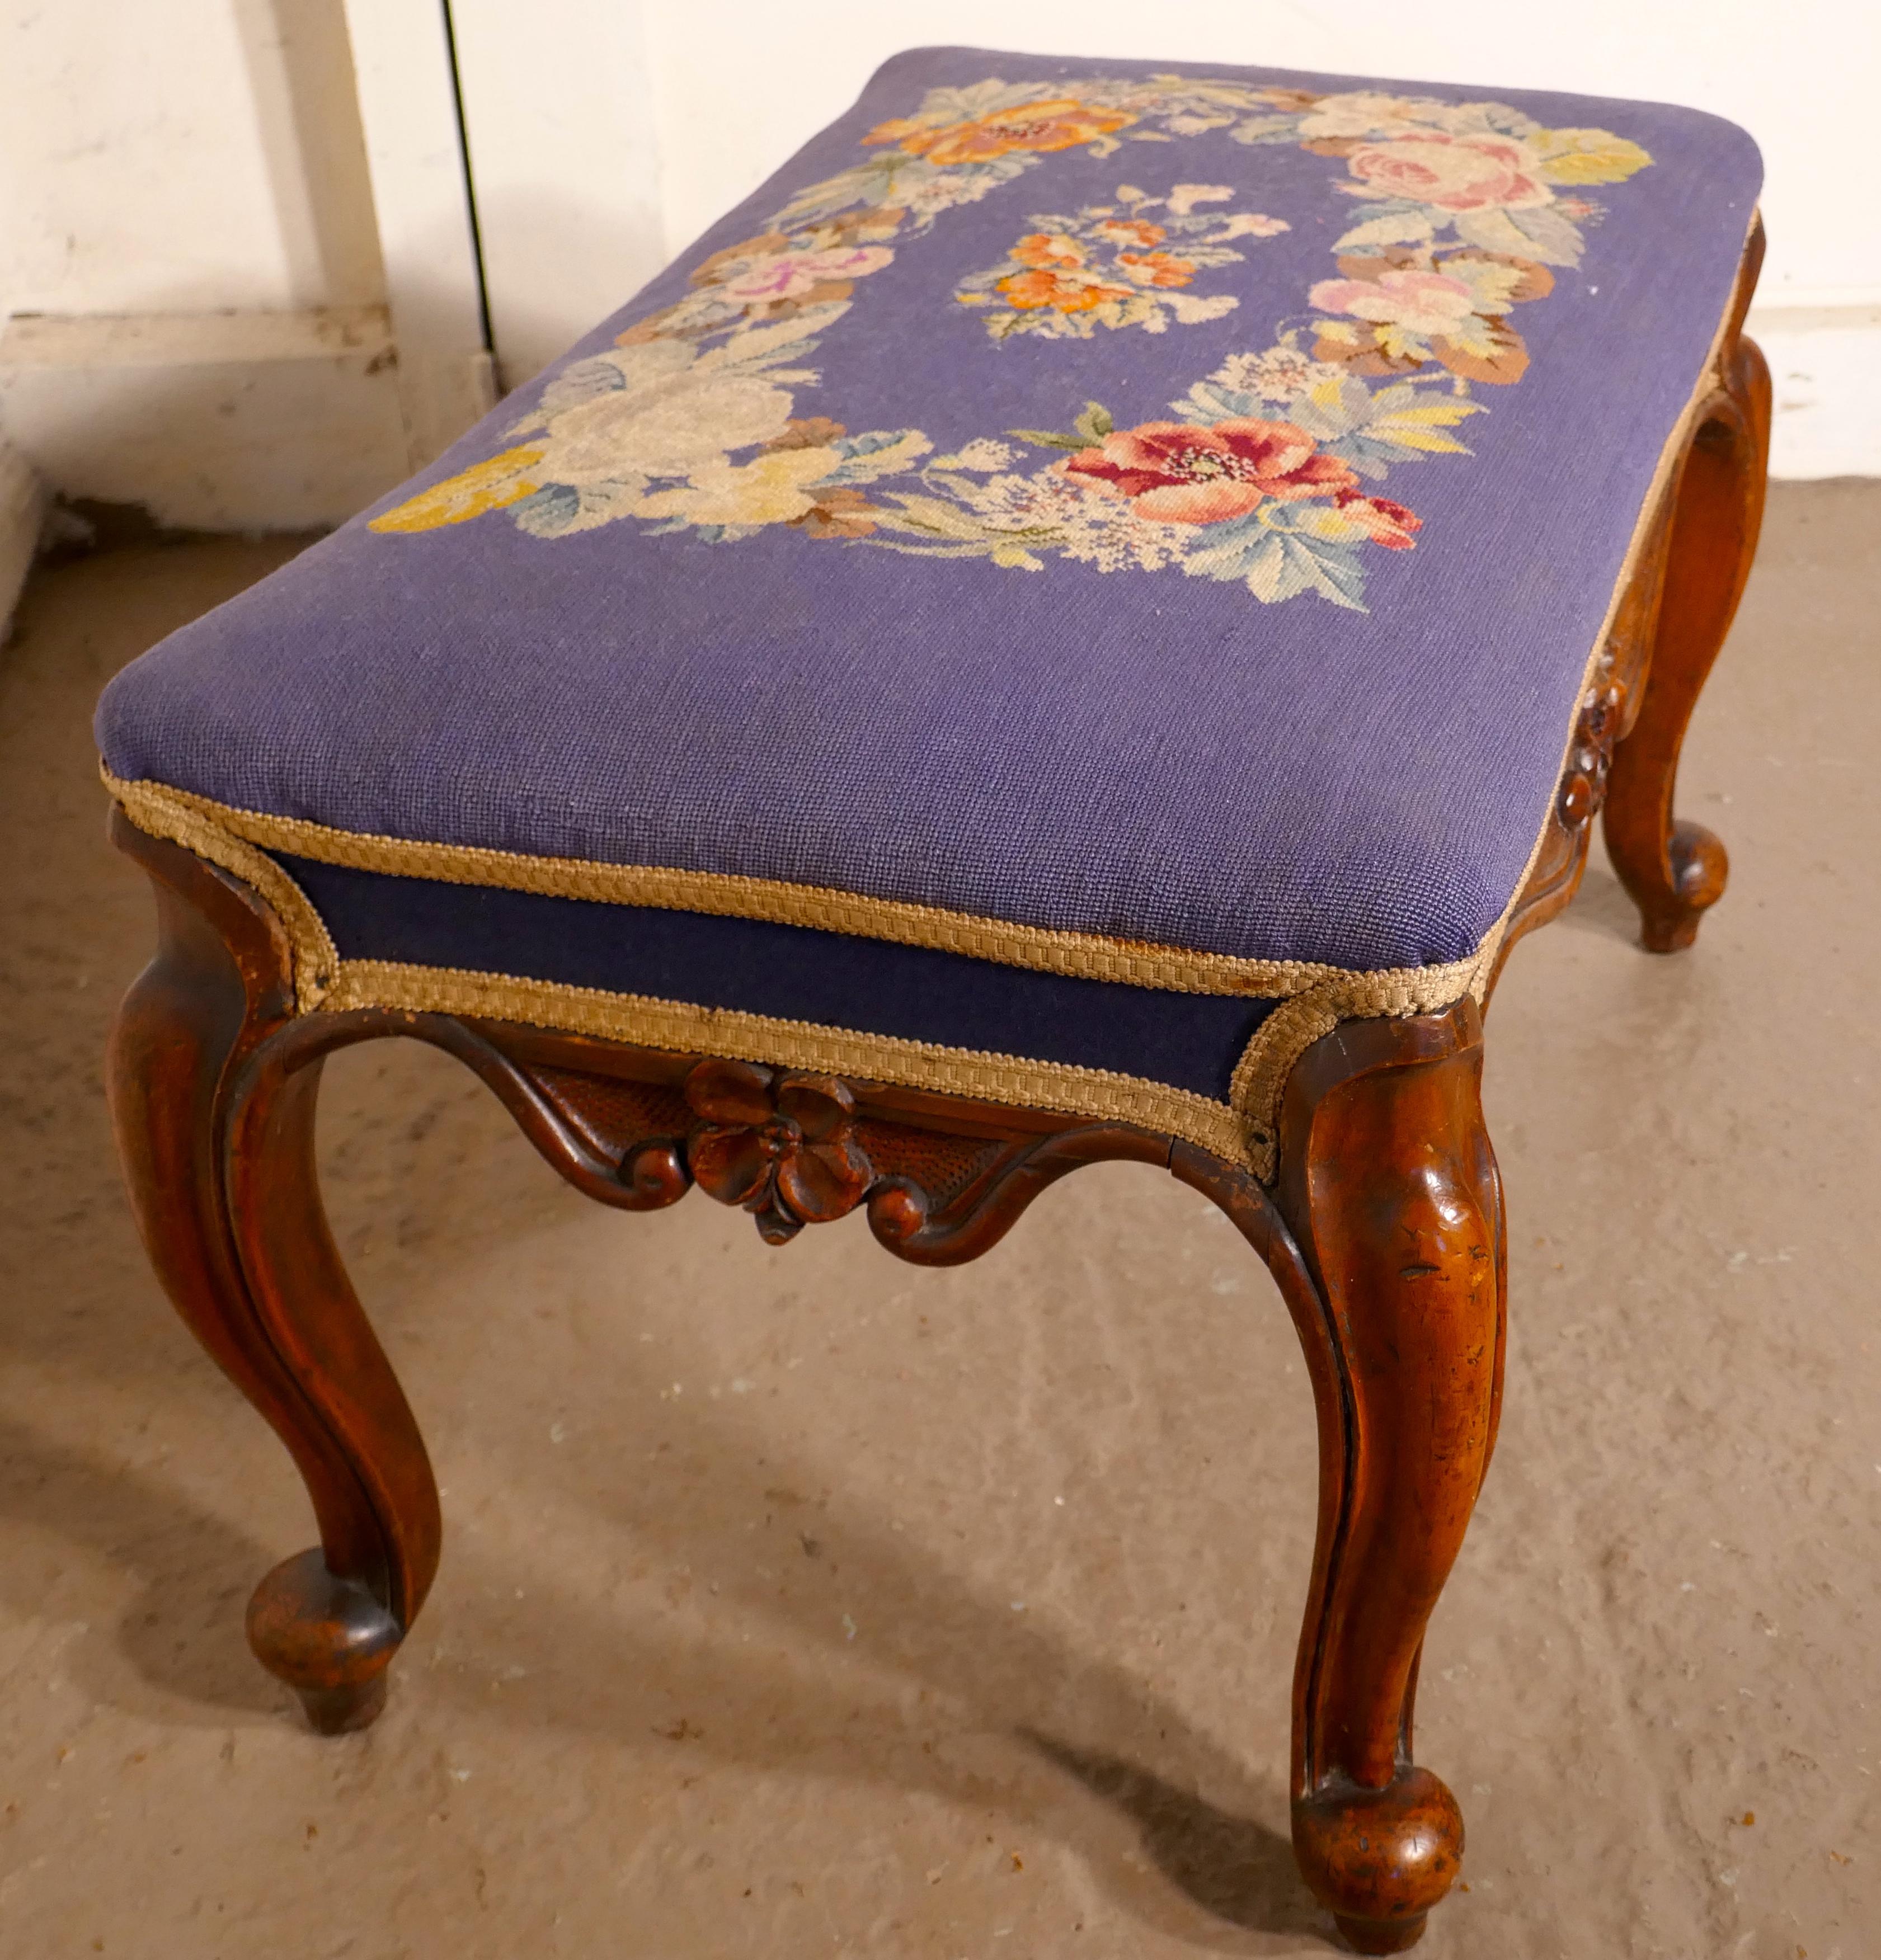 Victorian Petit Point Tapestry Upholstered Mahogany Stool In Good Condition For Sale In Chillerton, Isle of Wight